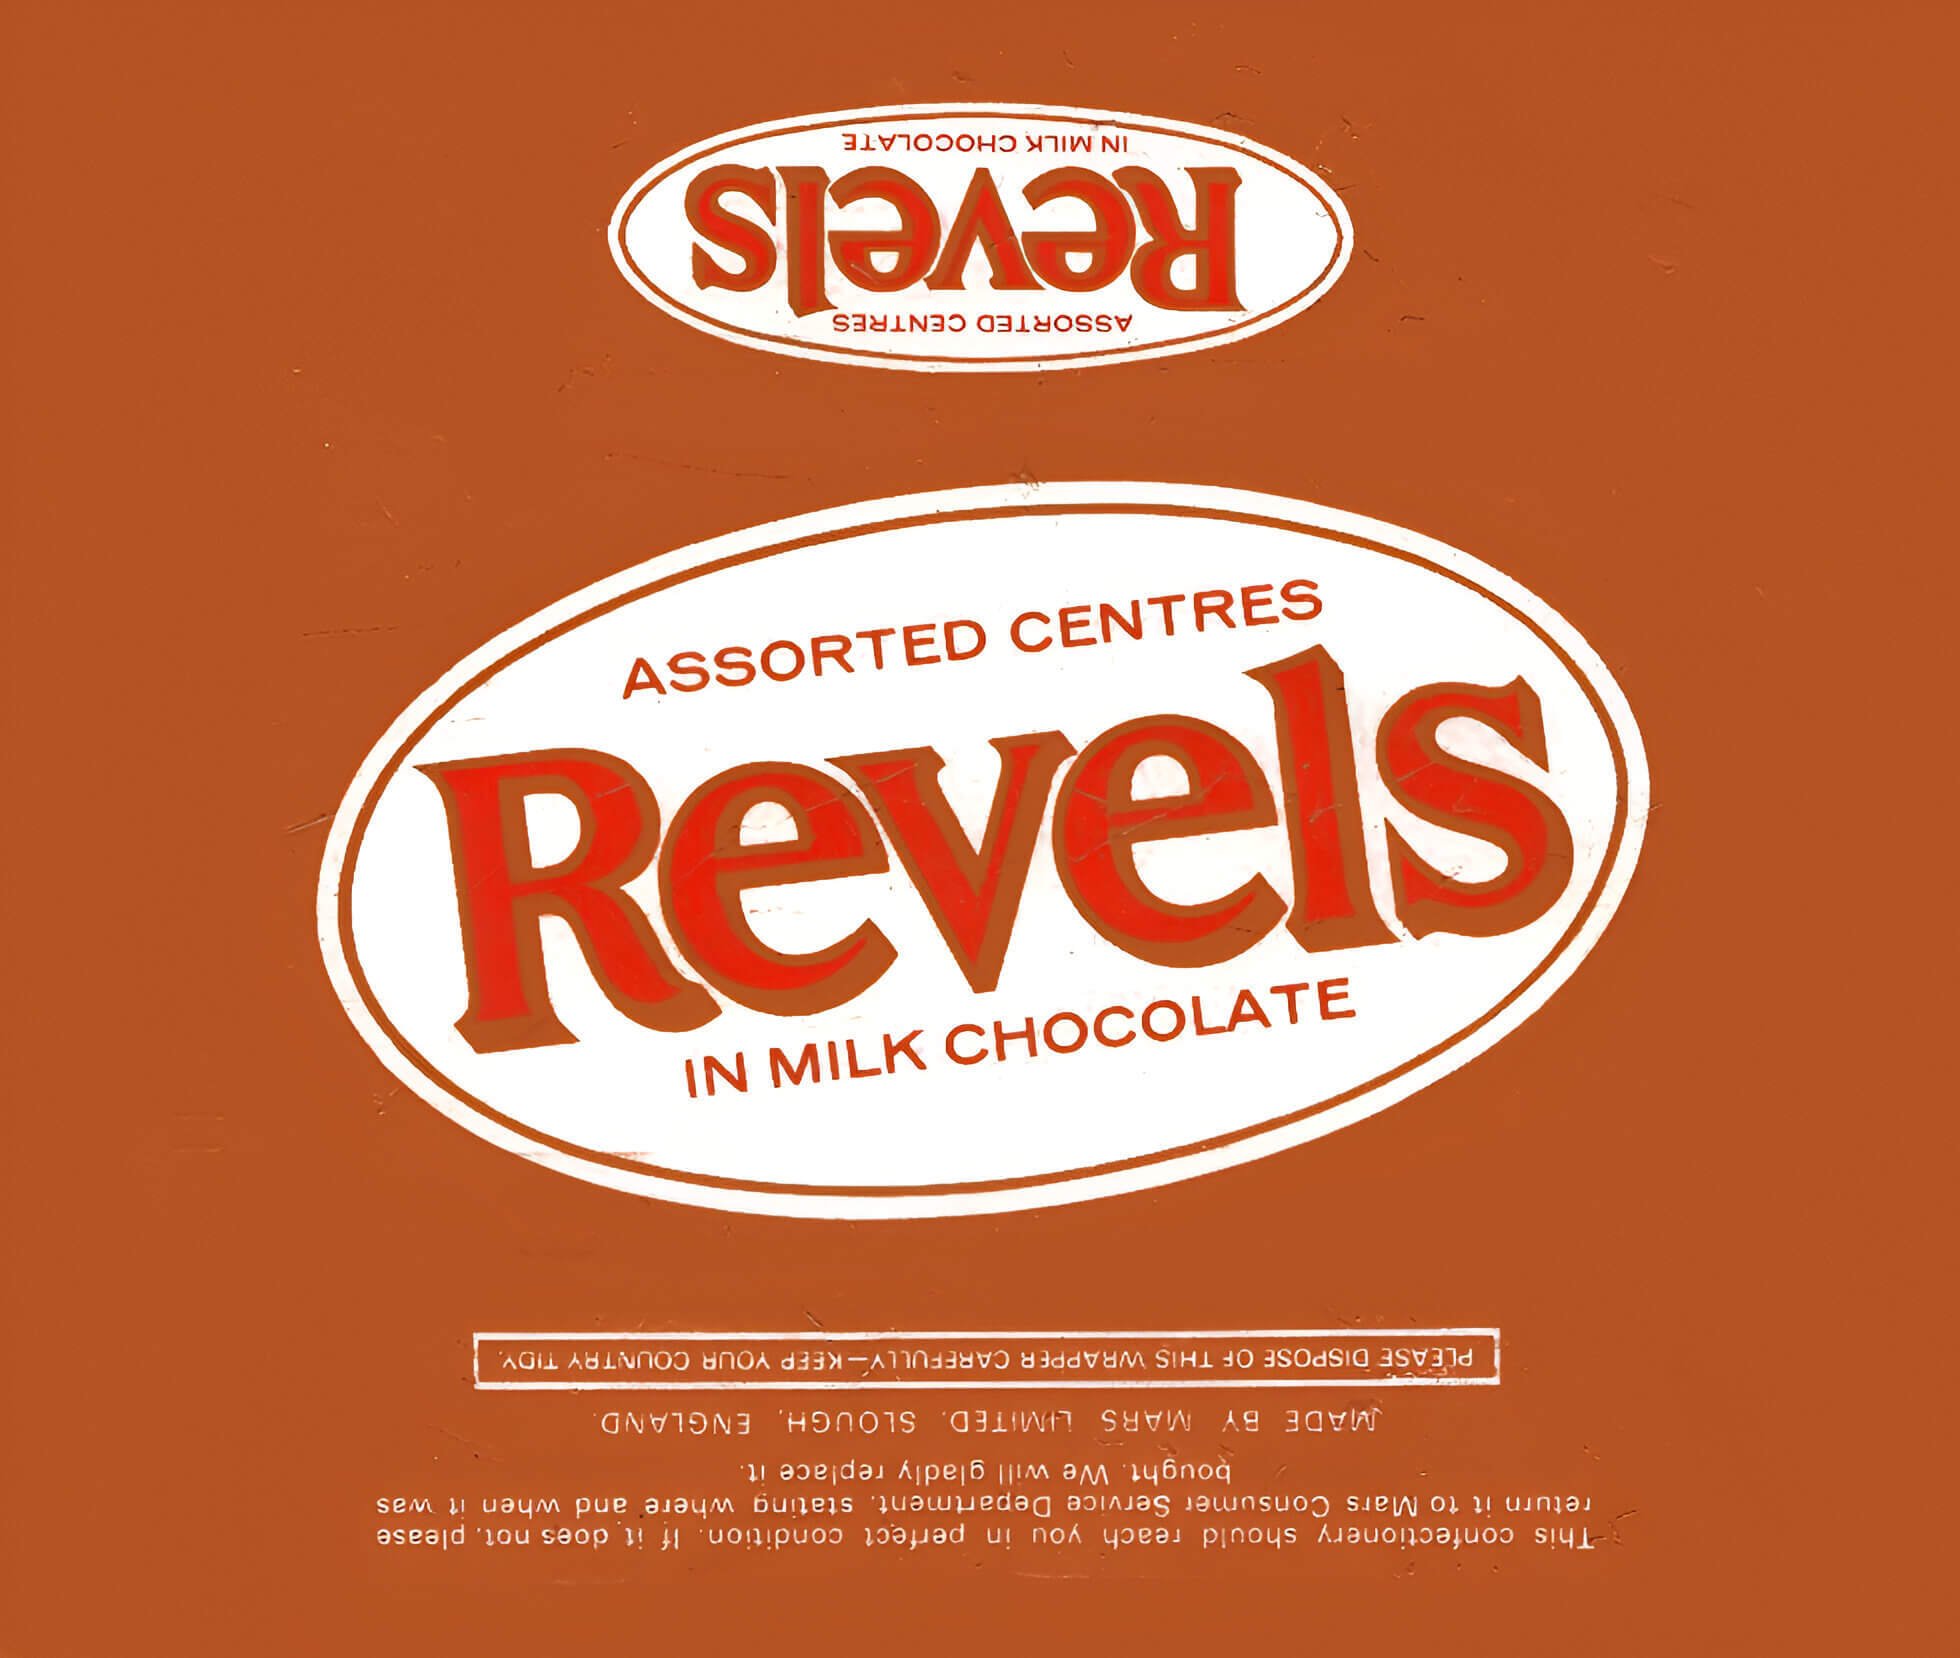 Revels wrapper from 1978, brown with white oval and red logo font